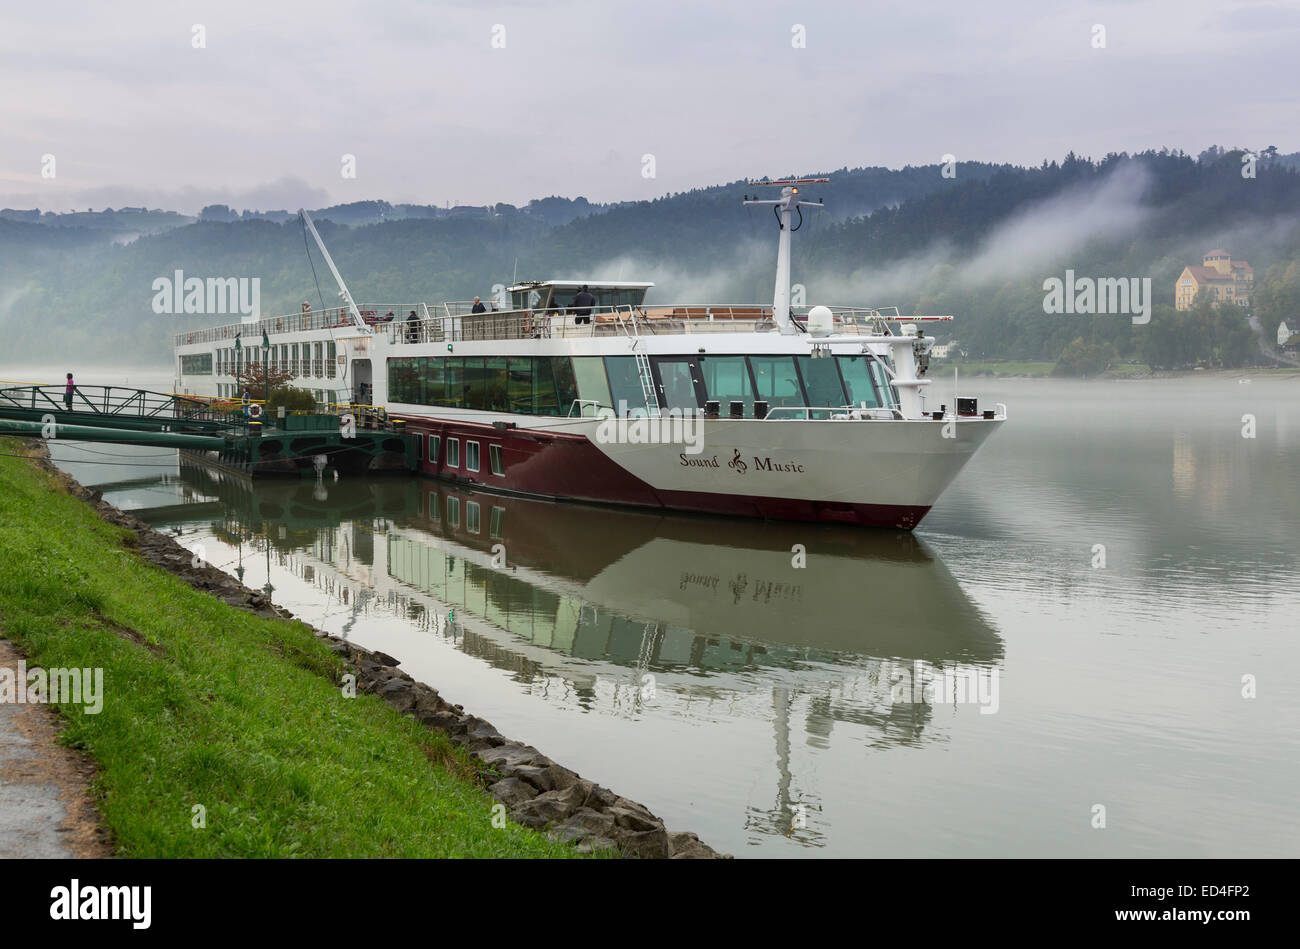 Bow of Sound of Music river cruise boat on Danube at dusk in Aschach an der Donau, Austria Stock Photo